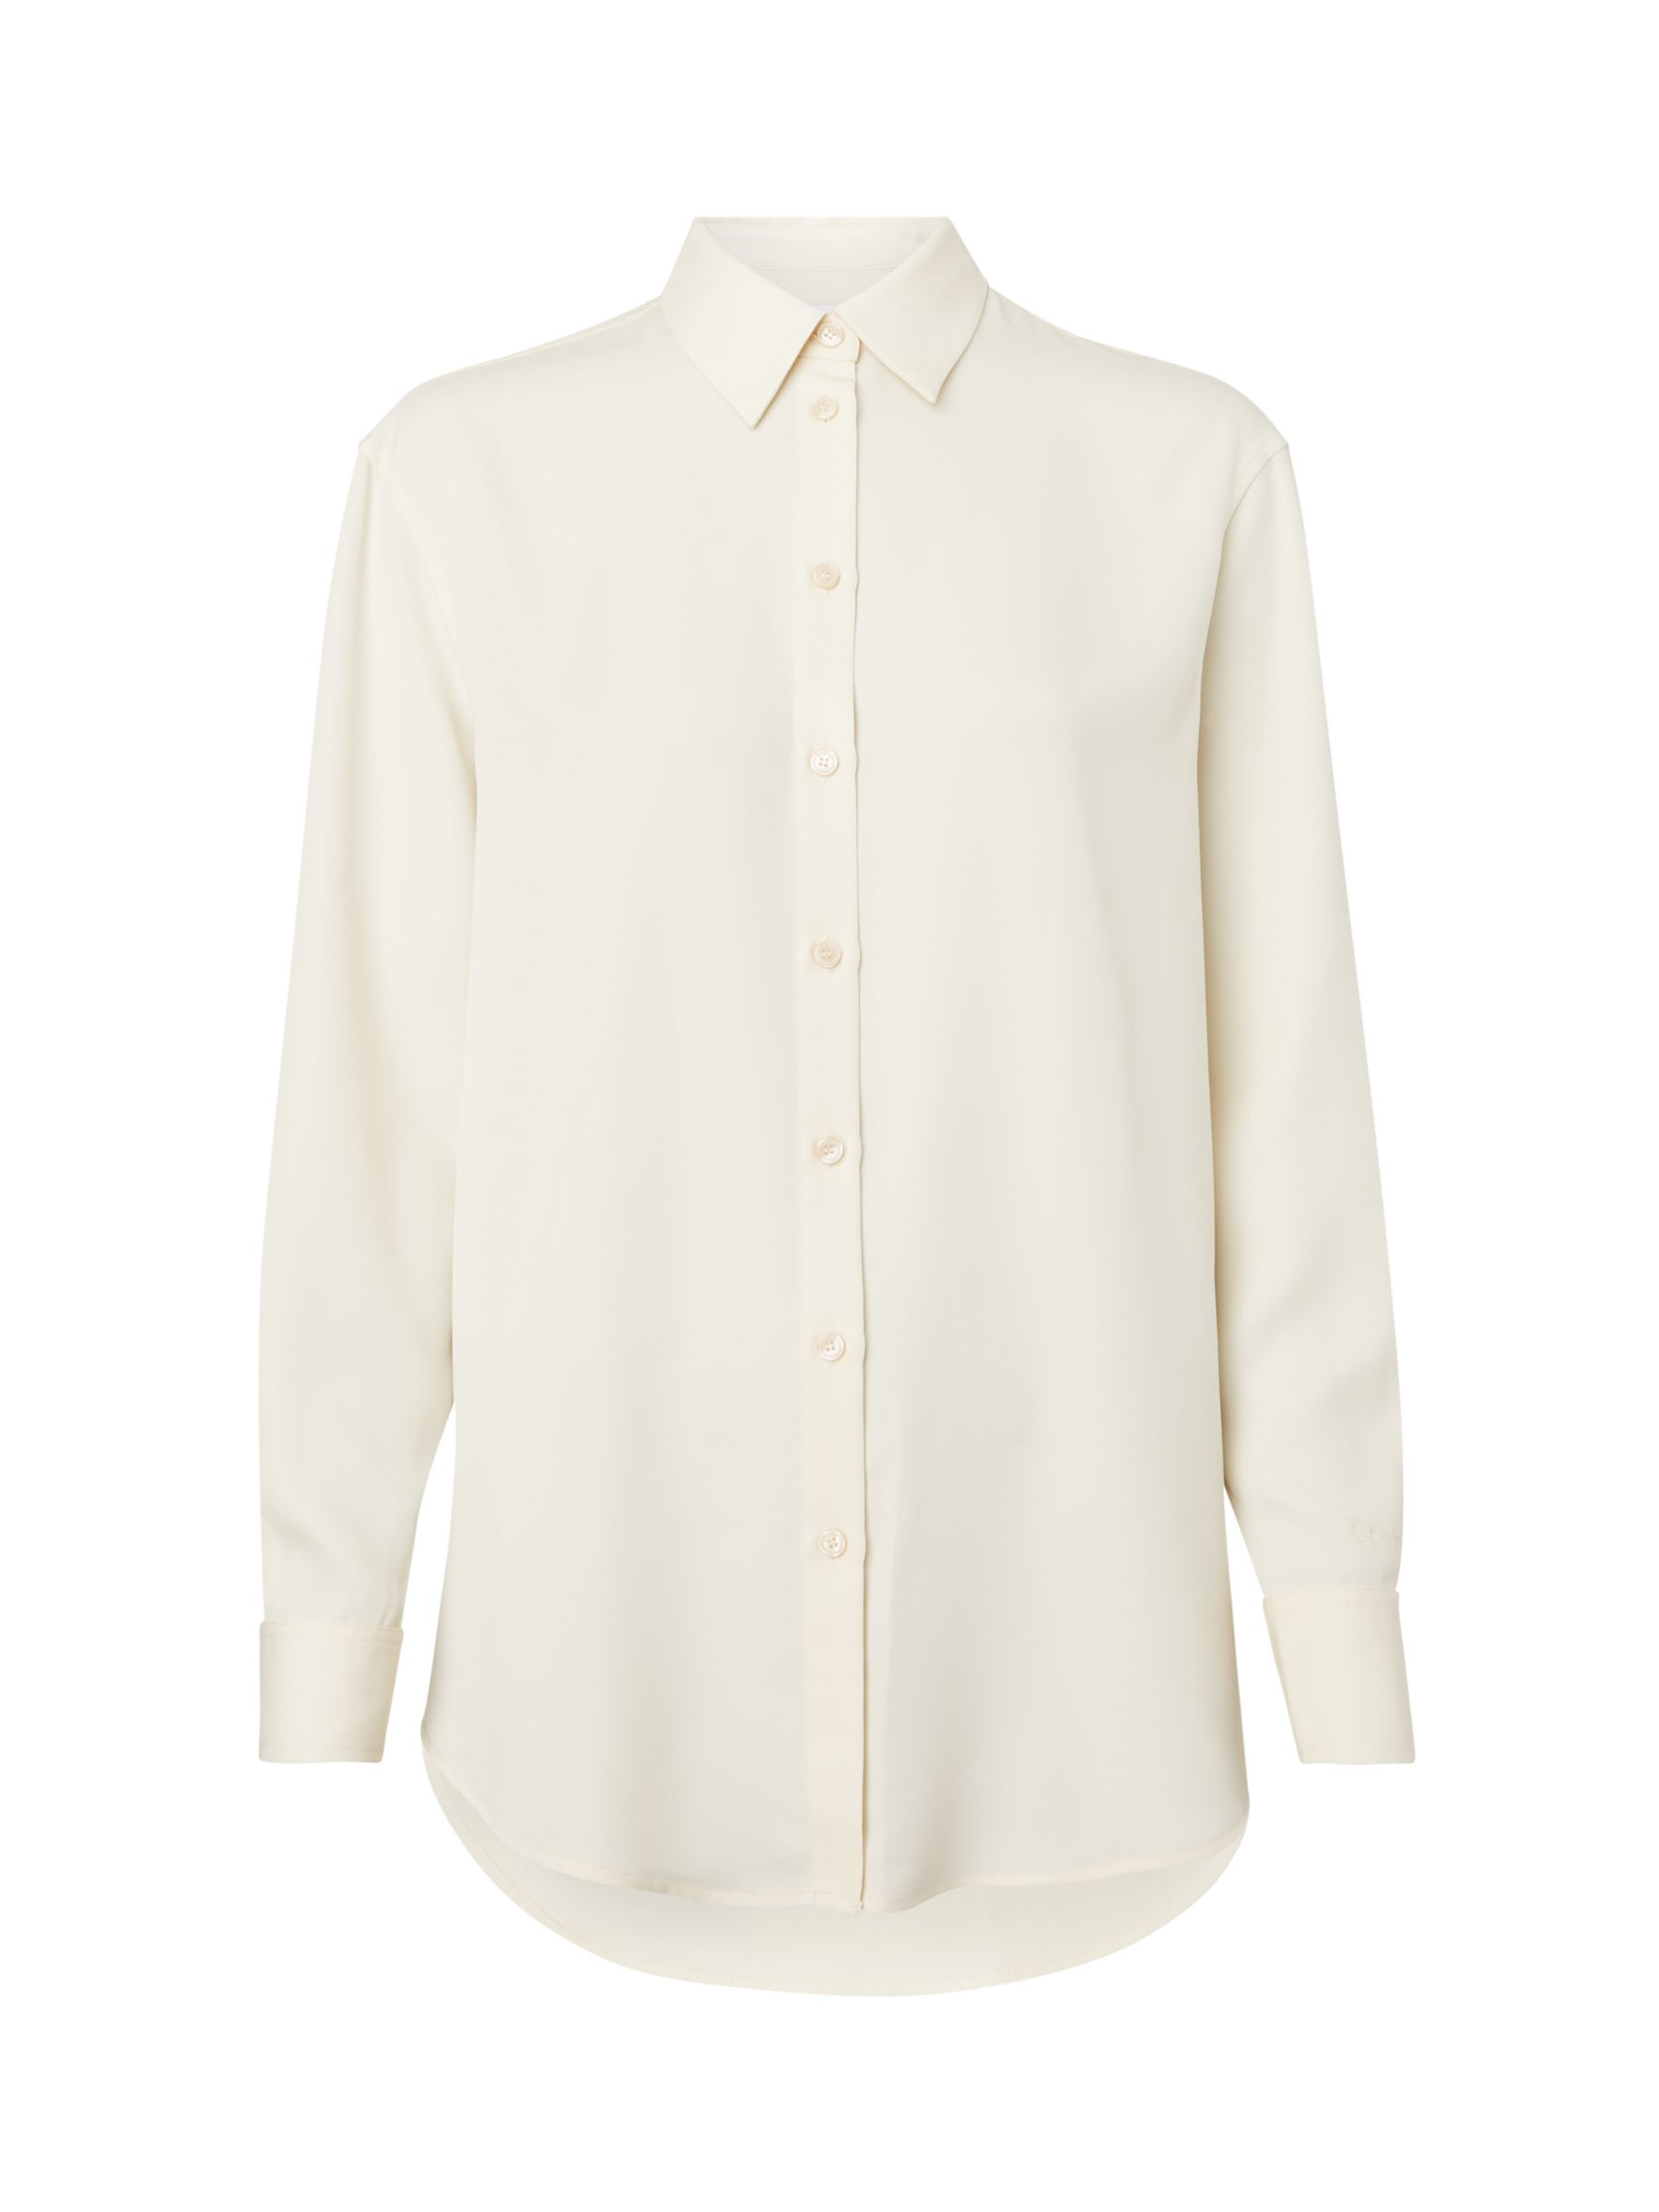 Buy Calvin Klein Recycled Relaxed Shirt Online at johnlewis.com